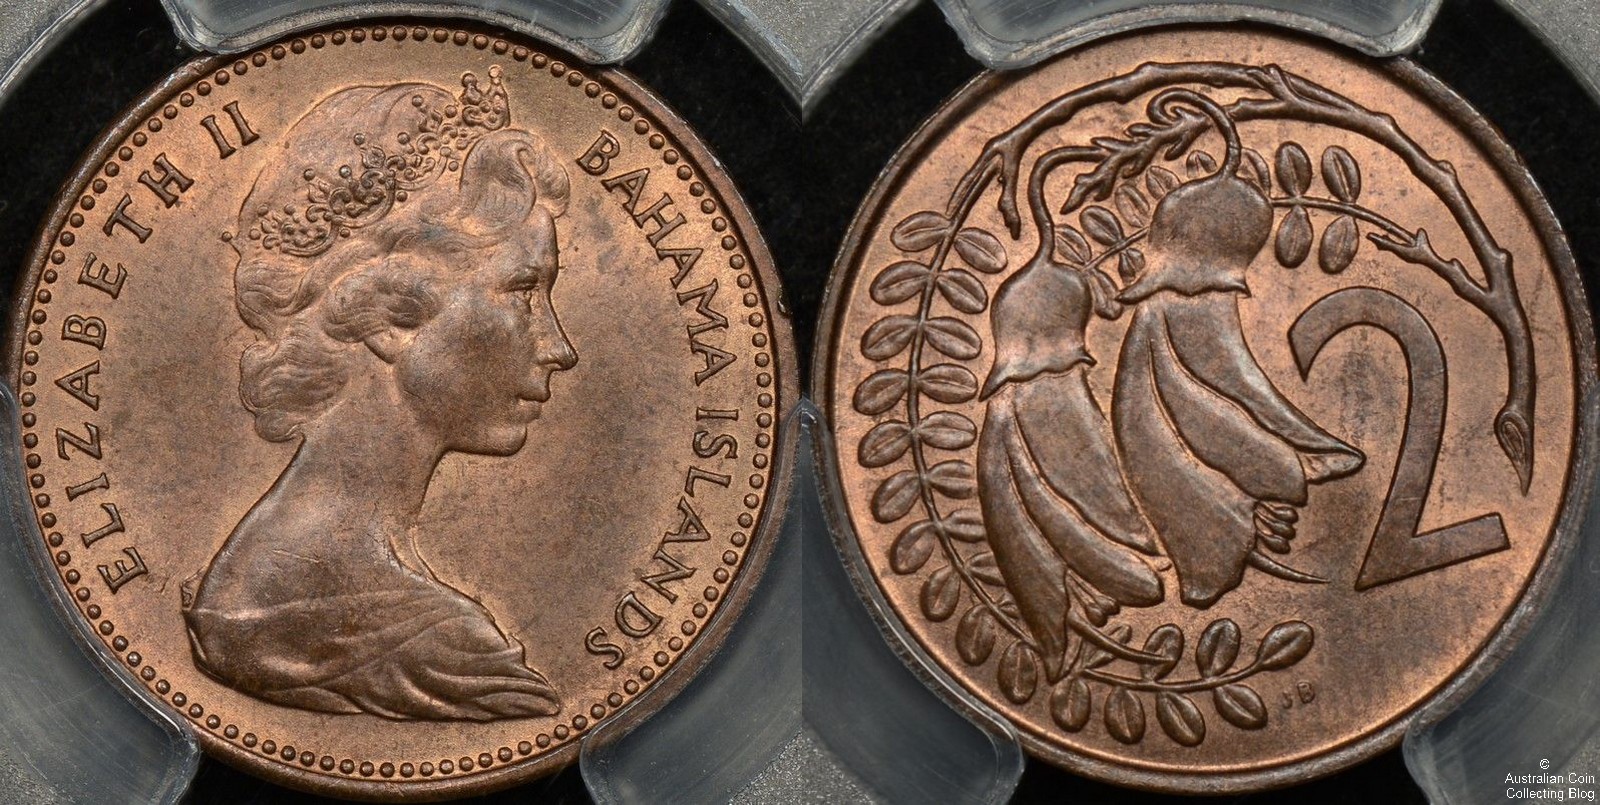 The Mule Coin Error - The Australian Coin Collecting Blog